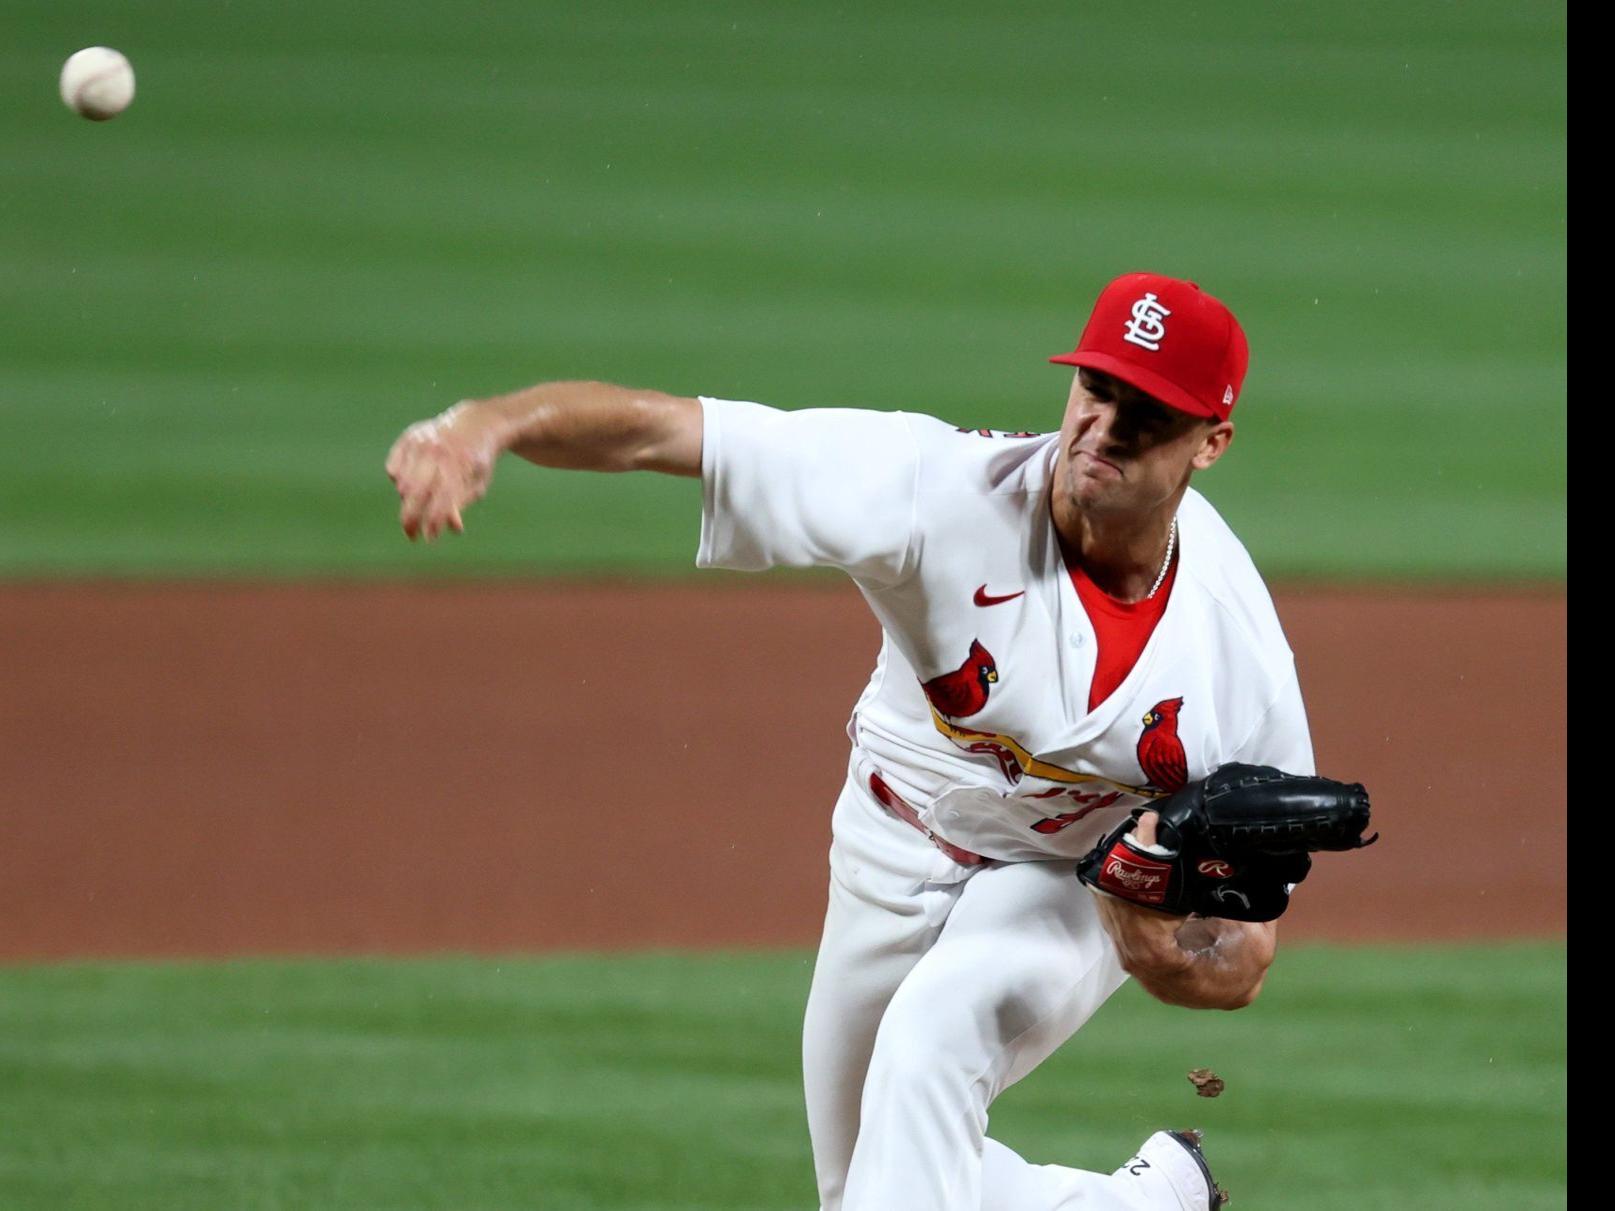 Jack Flaherty on contract, Bob Gibson, like being a Cardinal